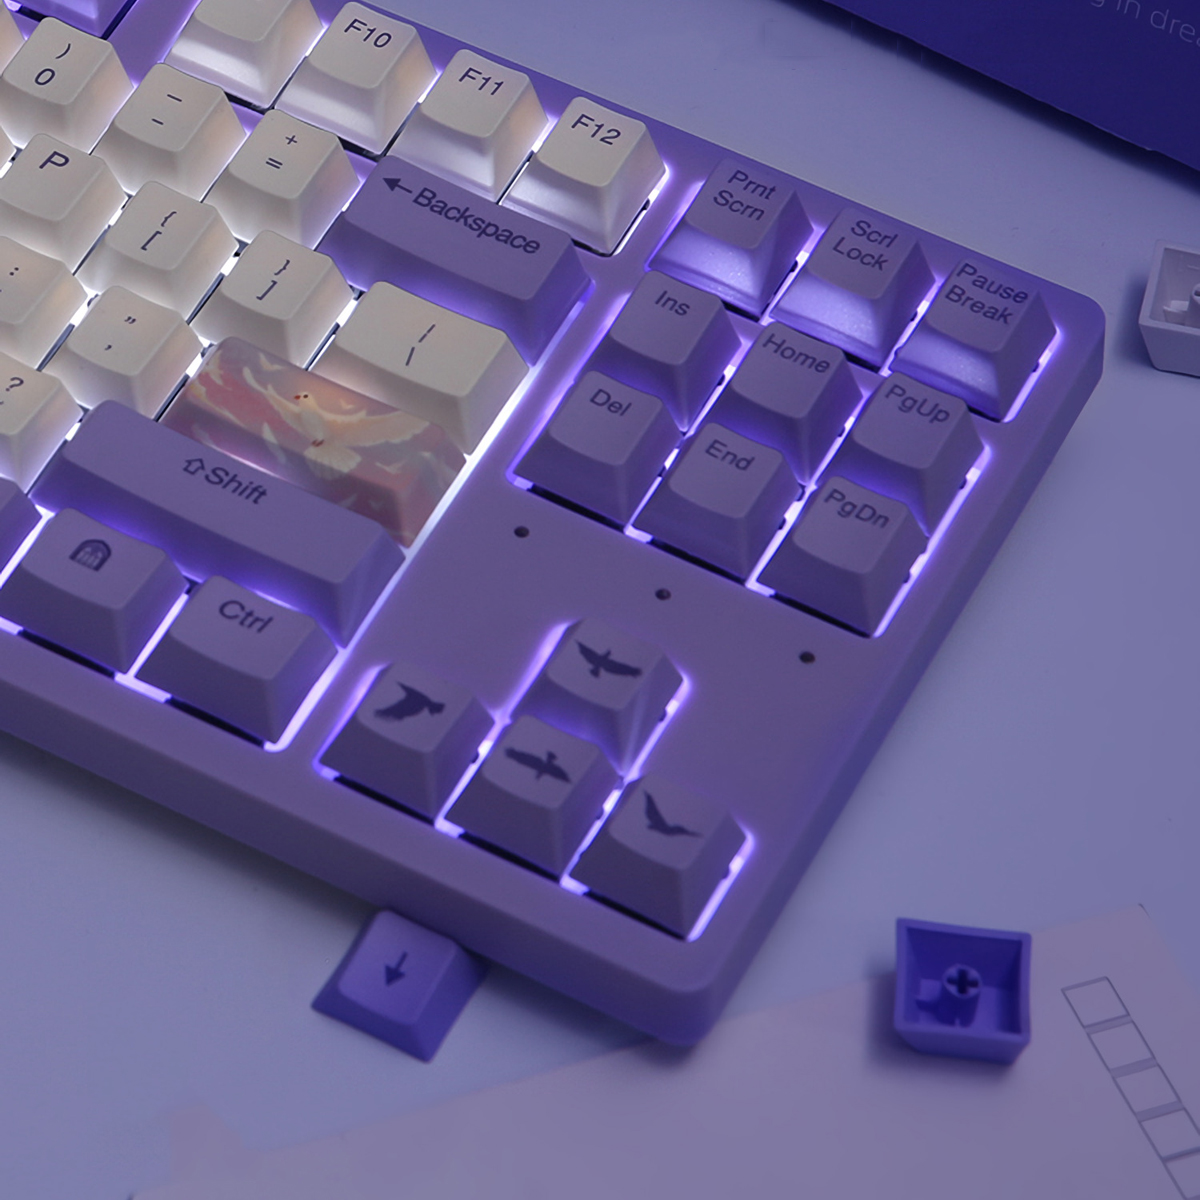 Find DAREU A87 Mechanical Keyboard Dream Theme Wired White Backlight 87 Keys Cherry MX Switch Purple PBT Keycaps Gaming Keyboard for Sale on Gipsybee.com with cryptocurrencies